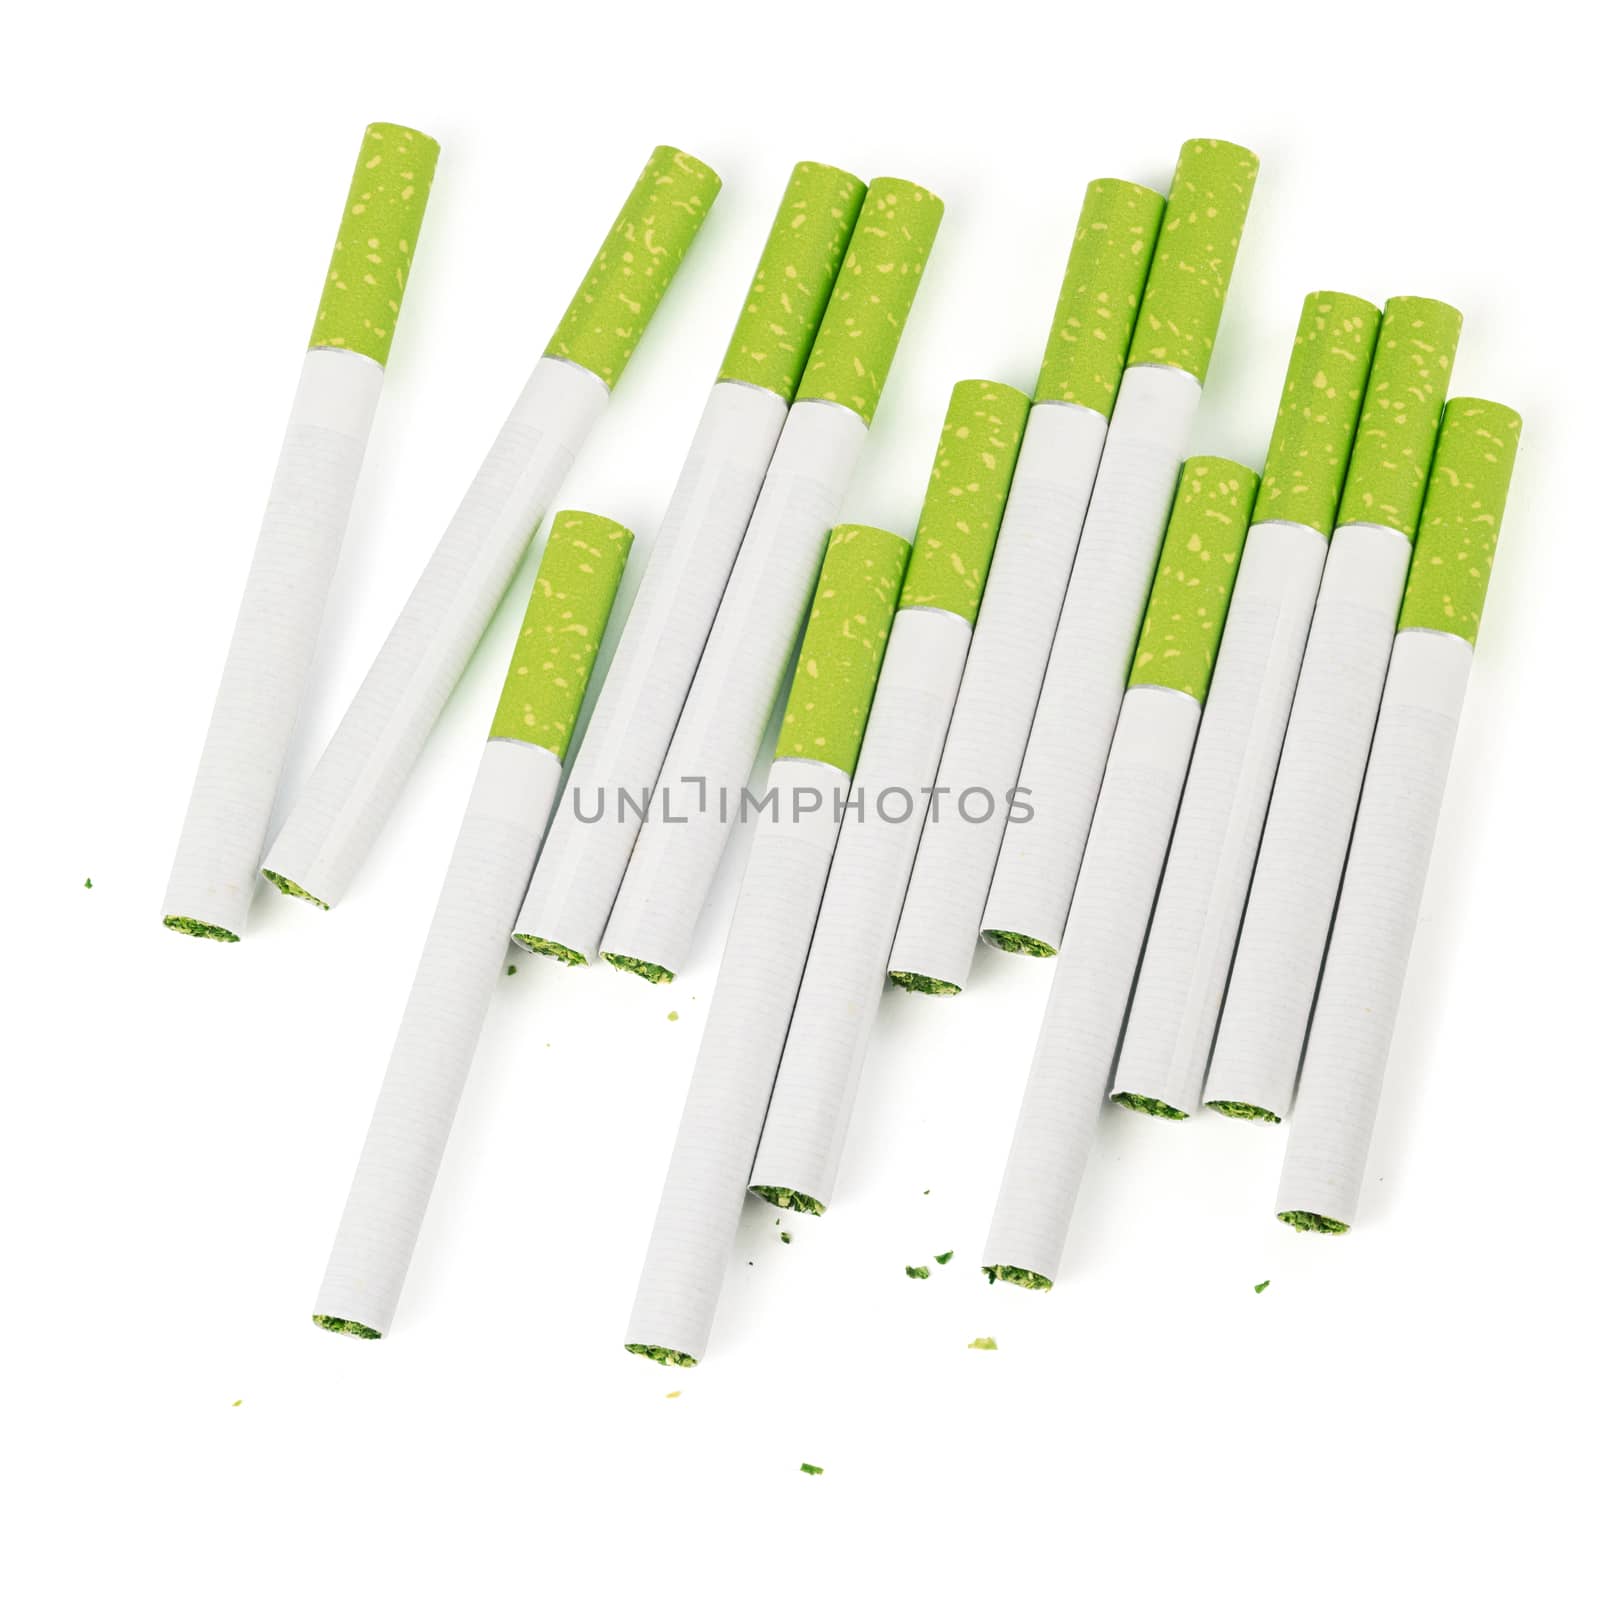 thirteen classic green filter cigarettes isolated on white background